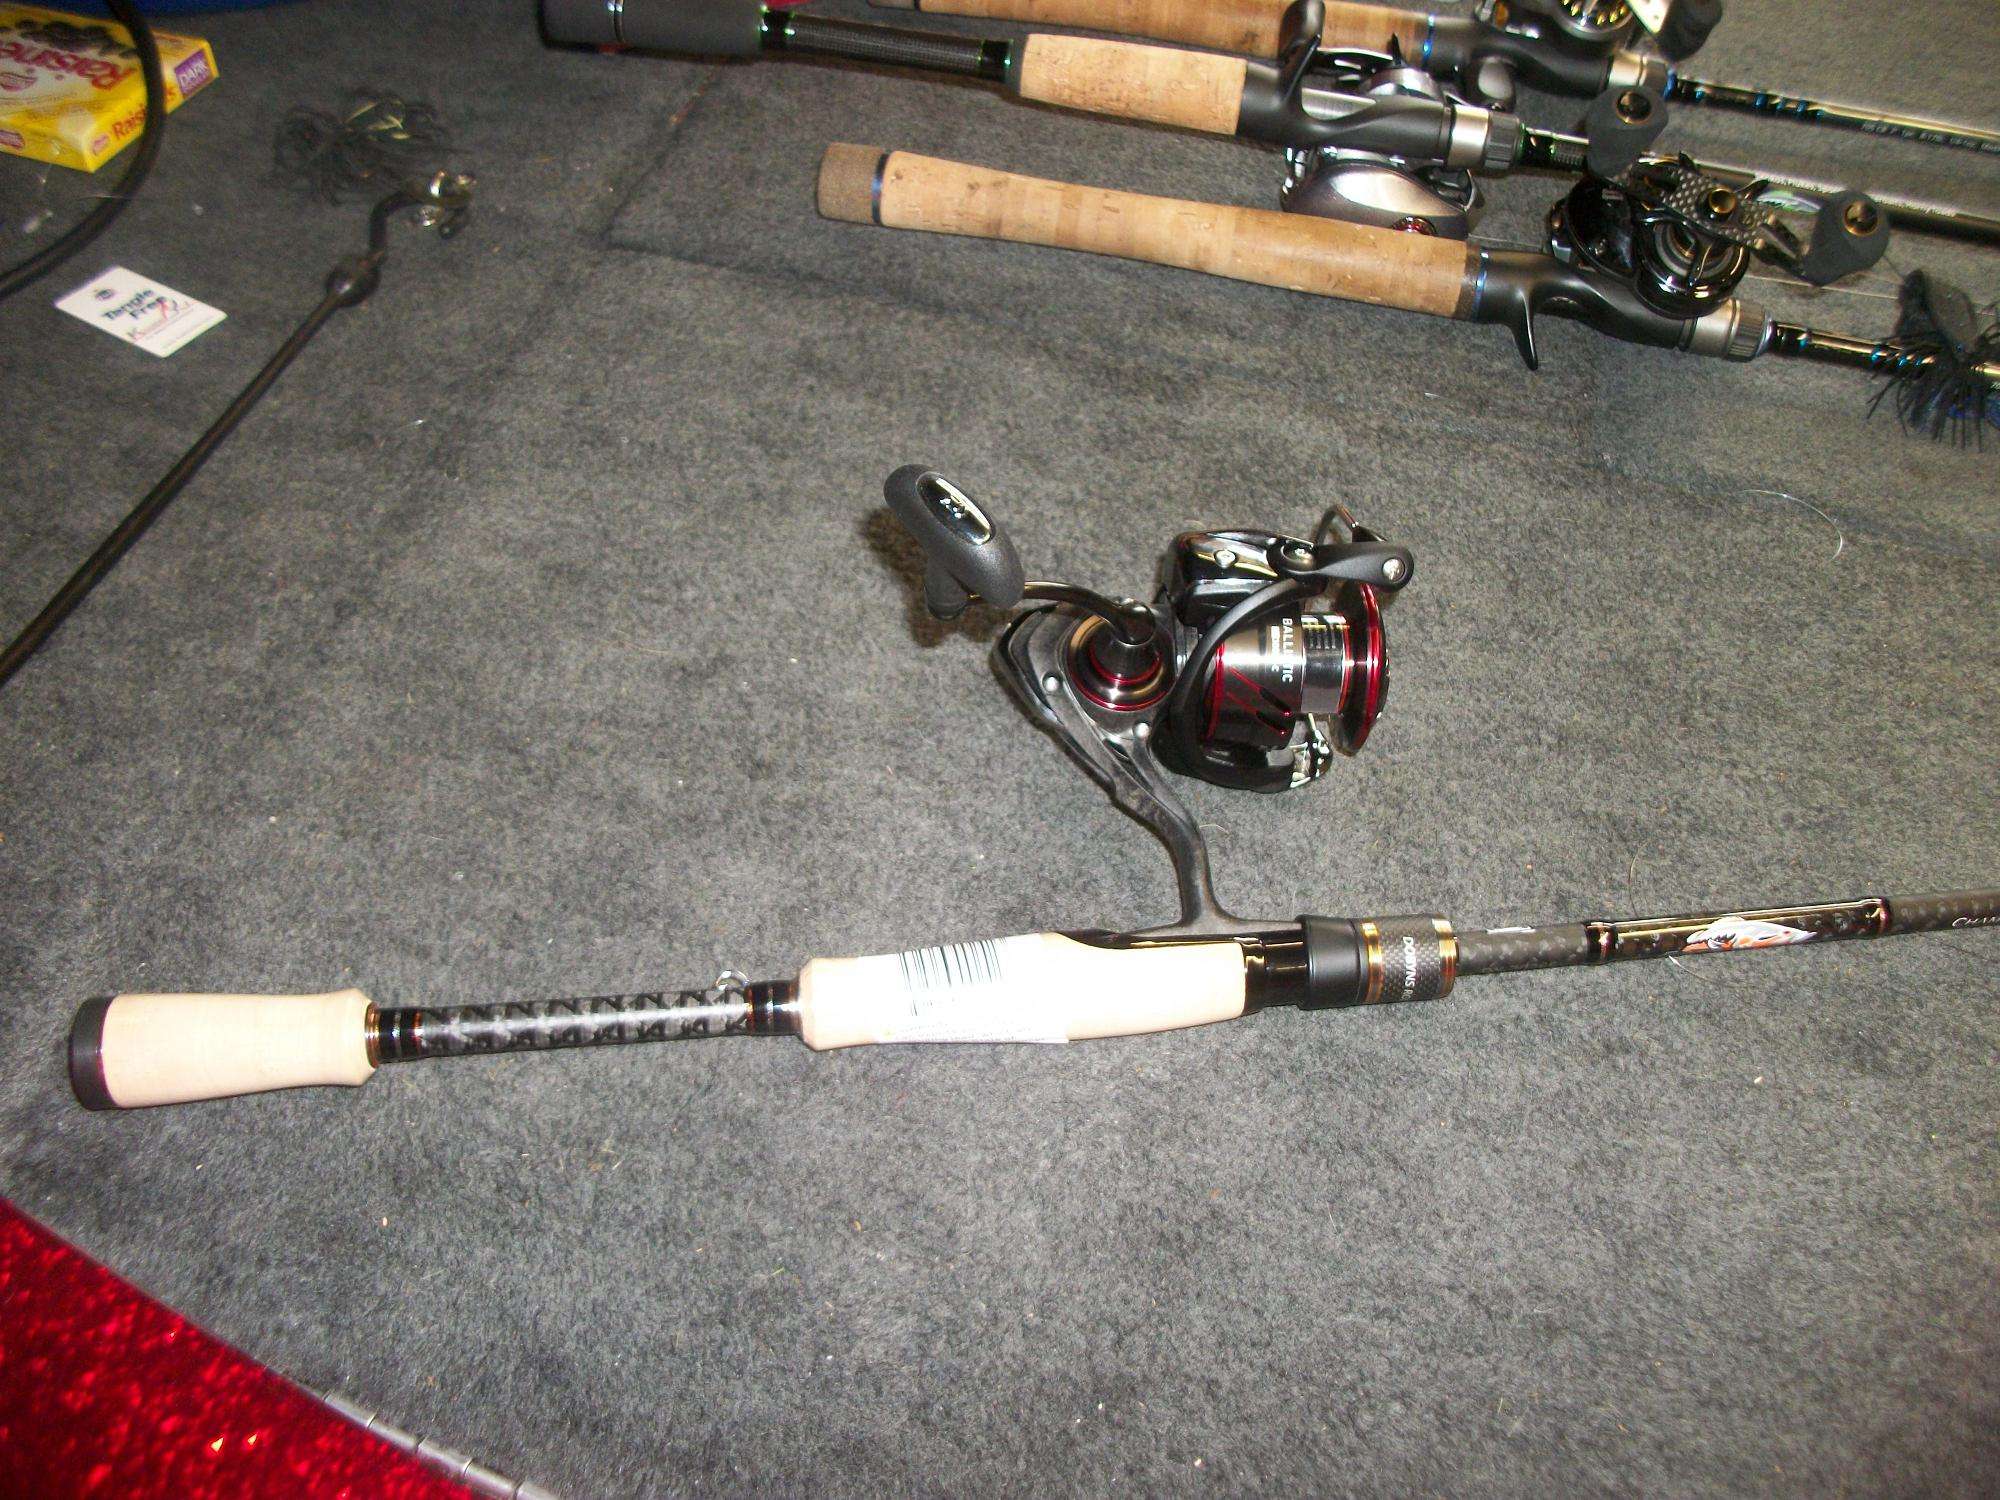 HELP: Fly rod wt recommendation - 5/6 or 7/8 wt? - Fishing Rods, Reels,  Line, and Knots - Bass Fishing Forums